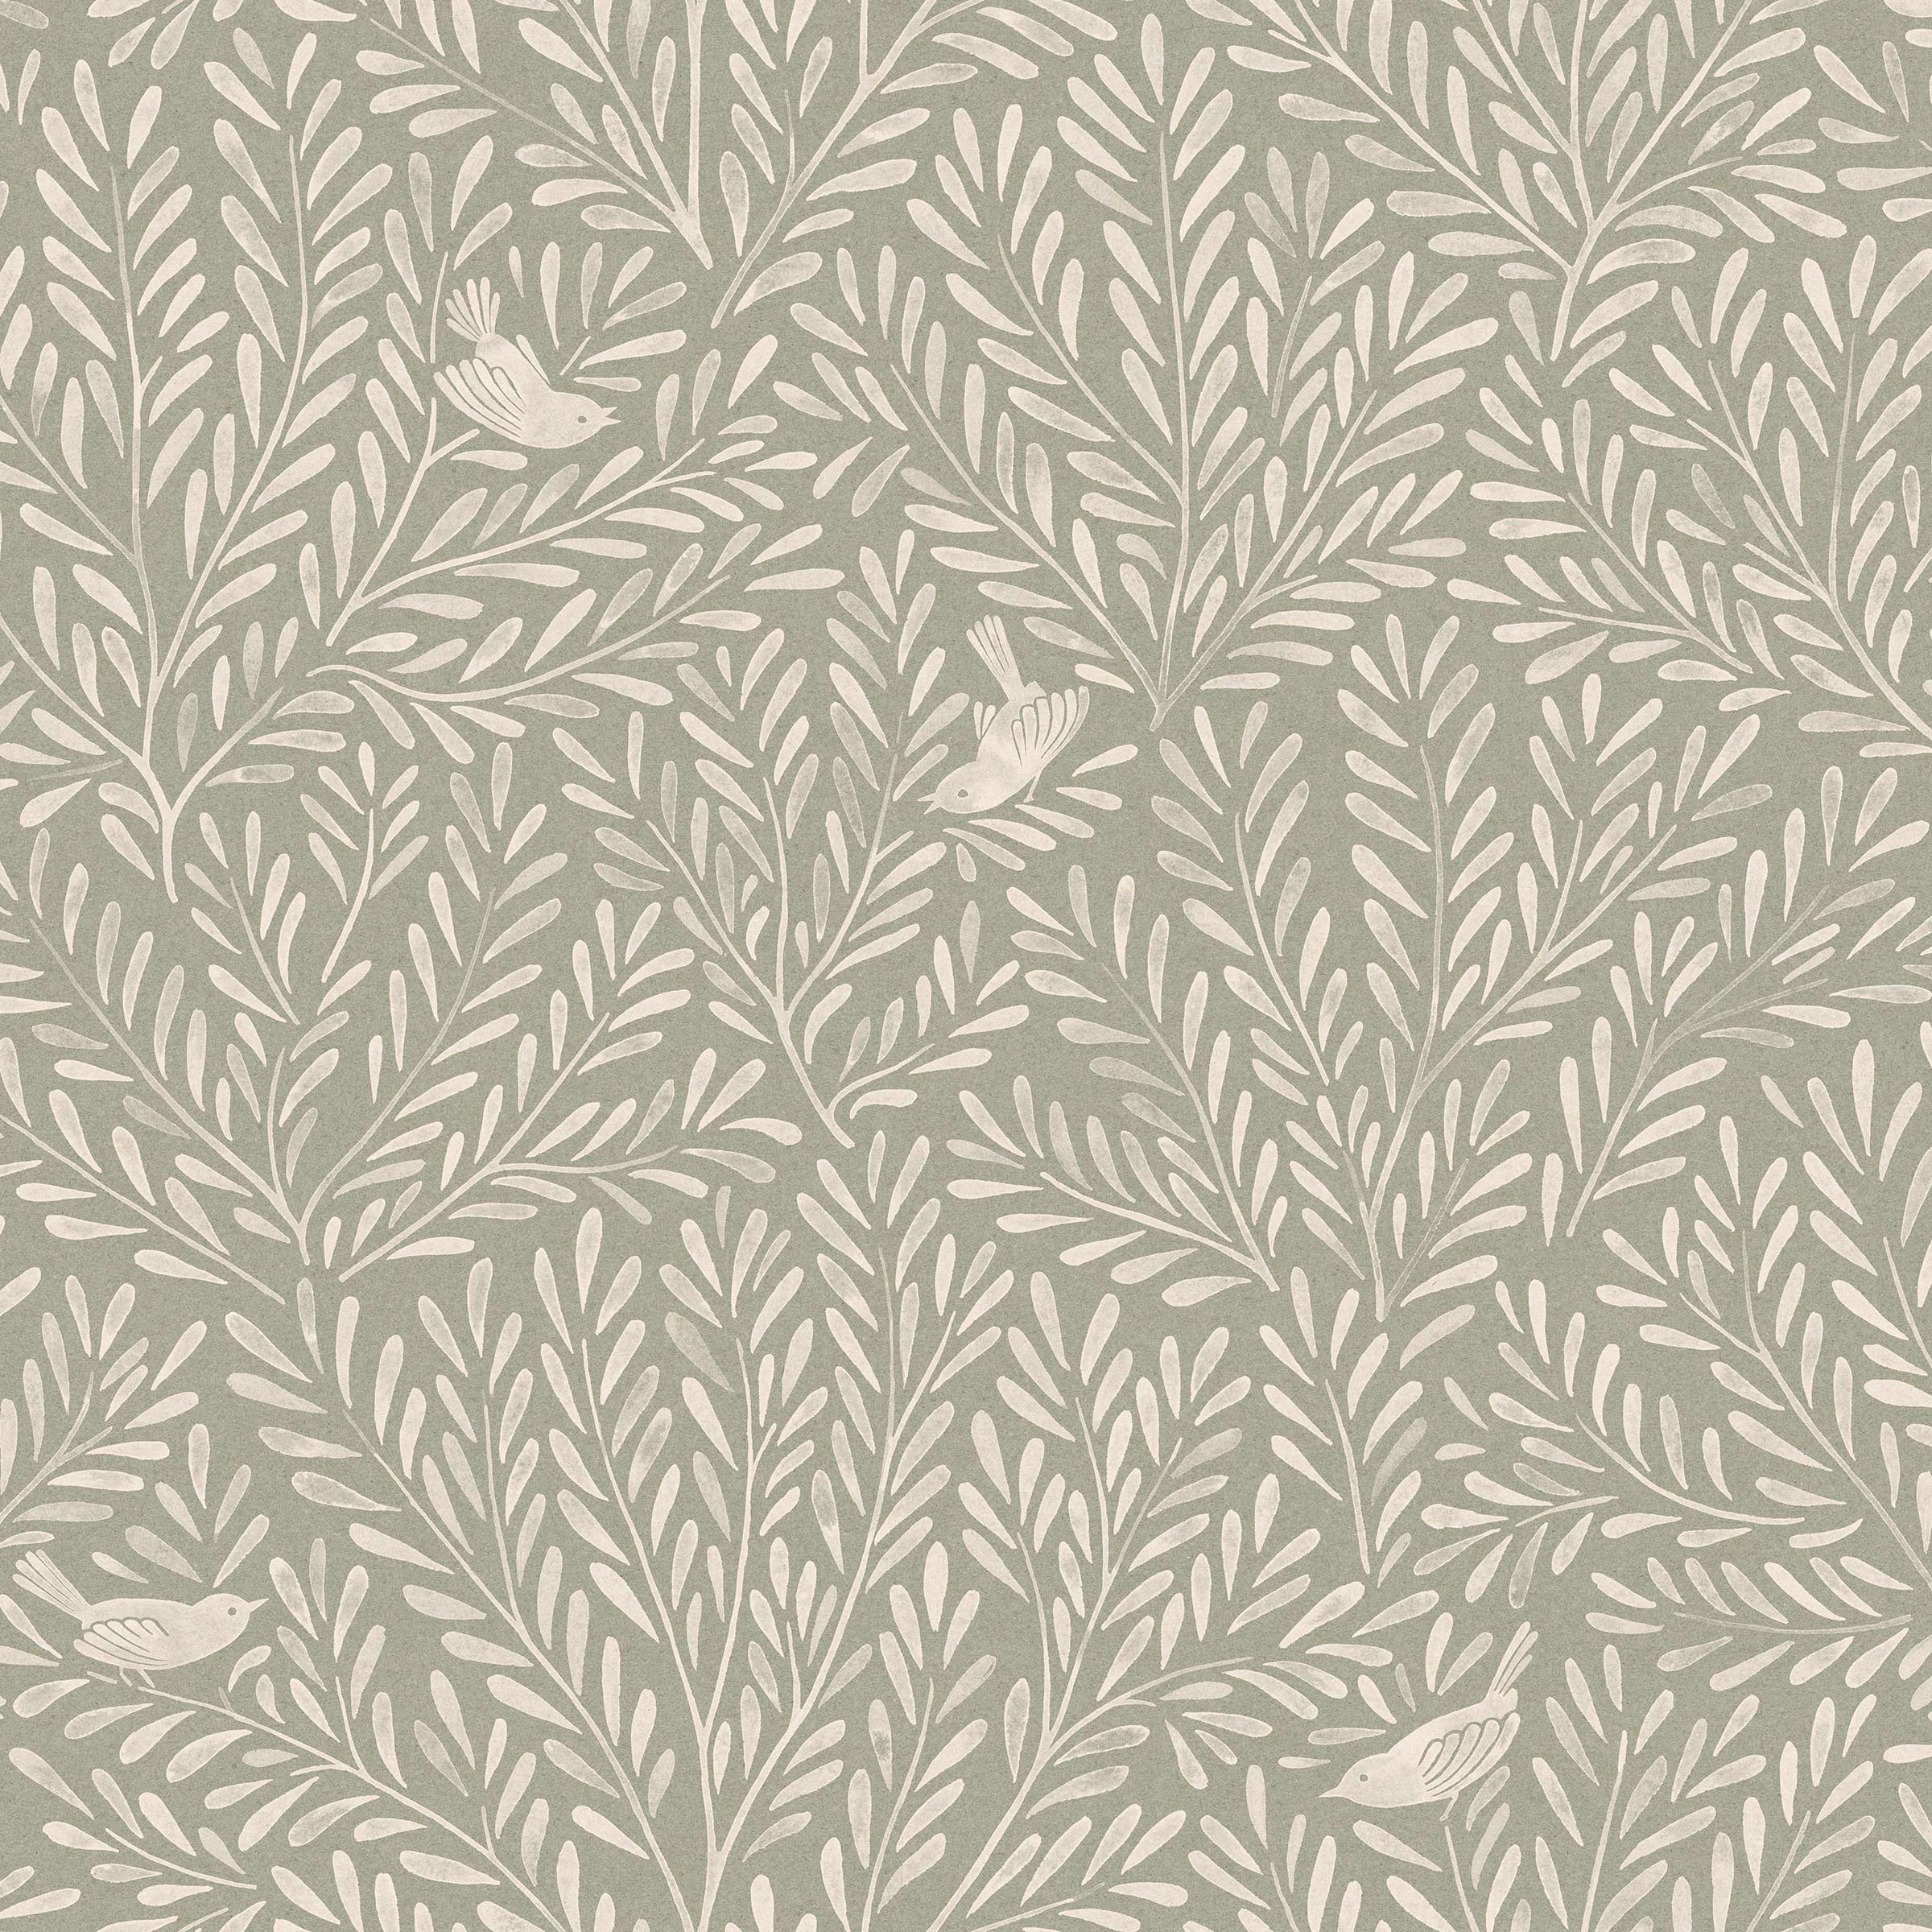 Detail of wallpaper in a playful bird and leaf print in white on a sage field.